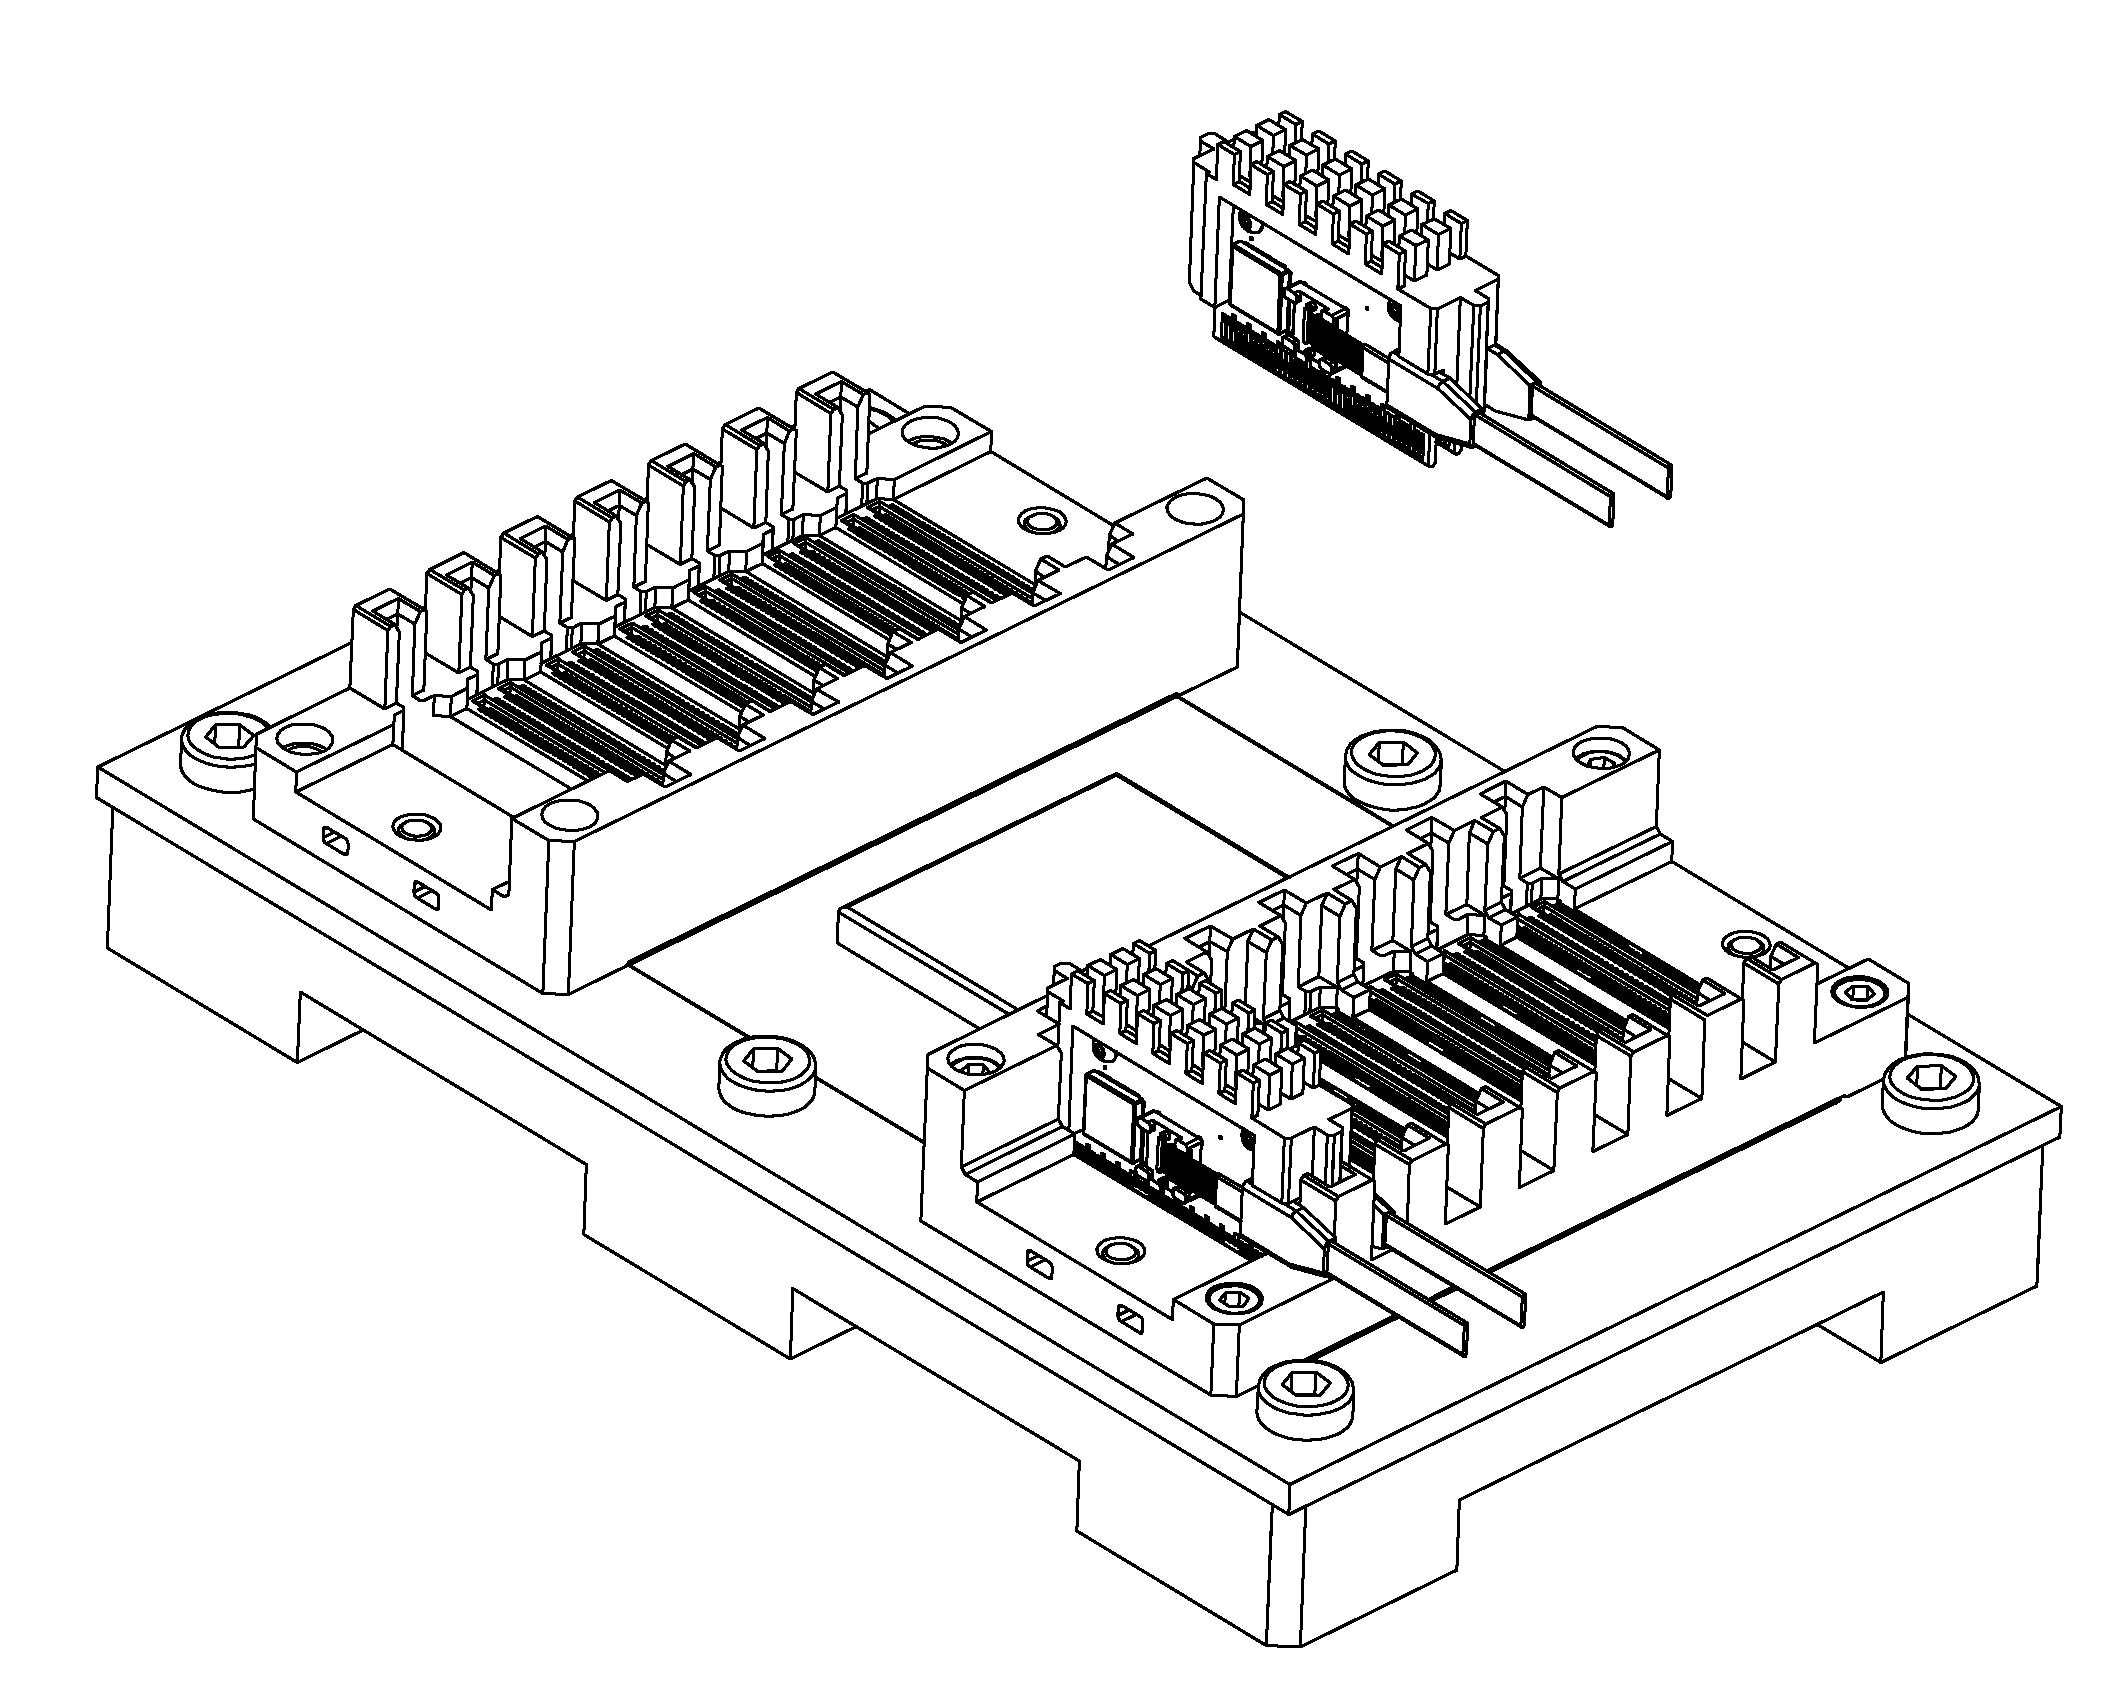 Opto-electronic device assembly